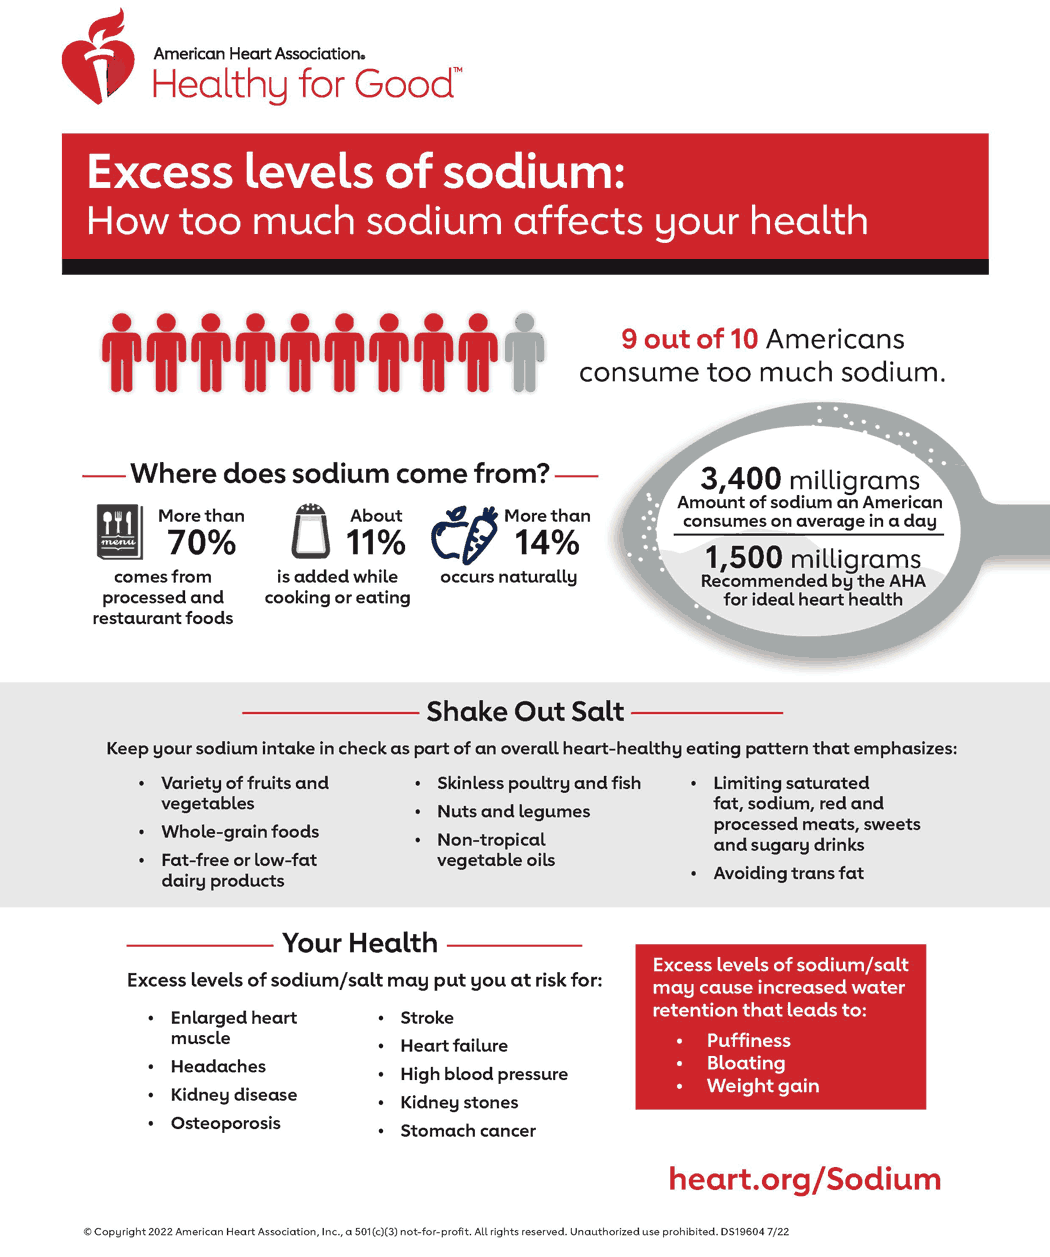 Sodium intake and muscle function